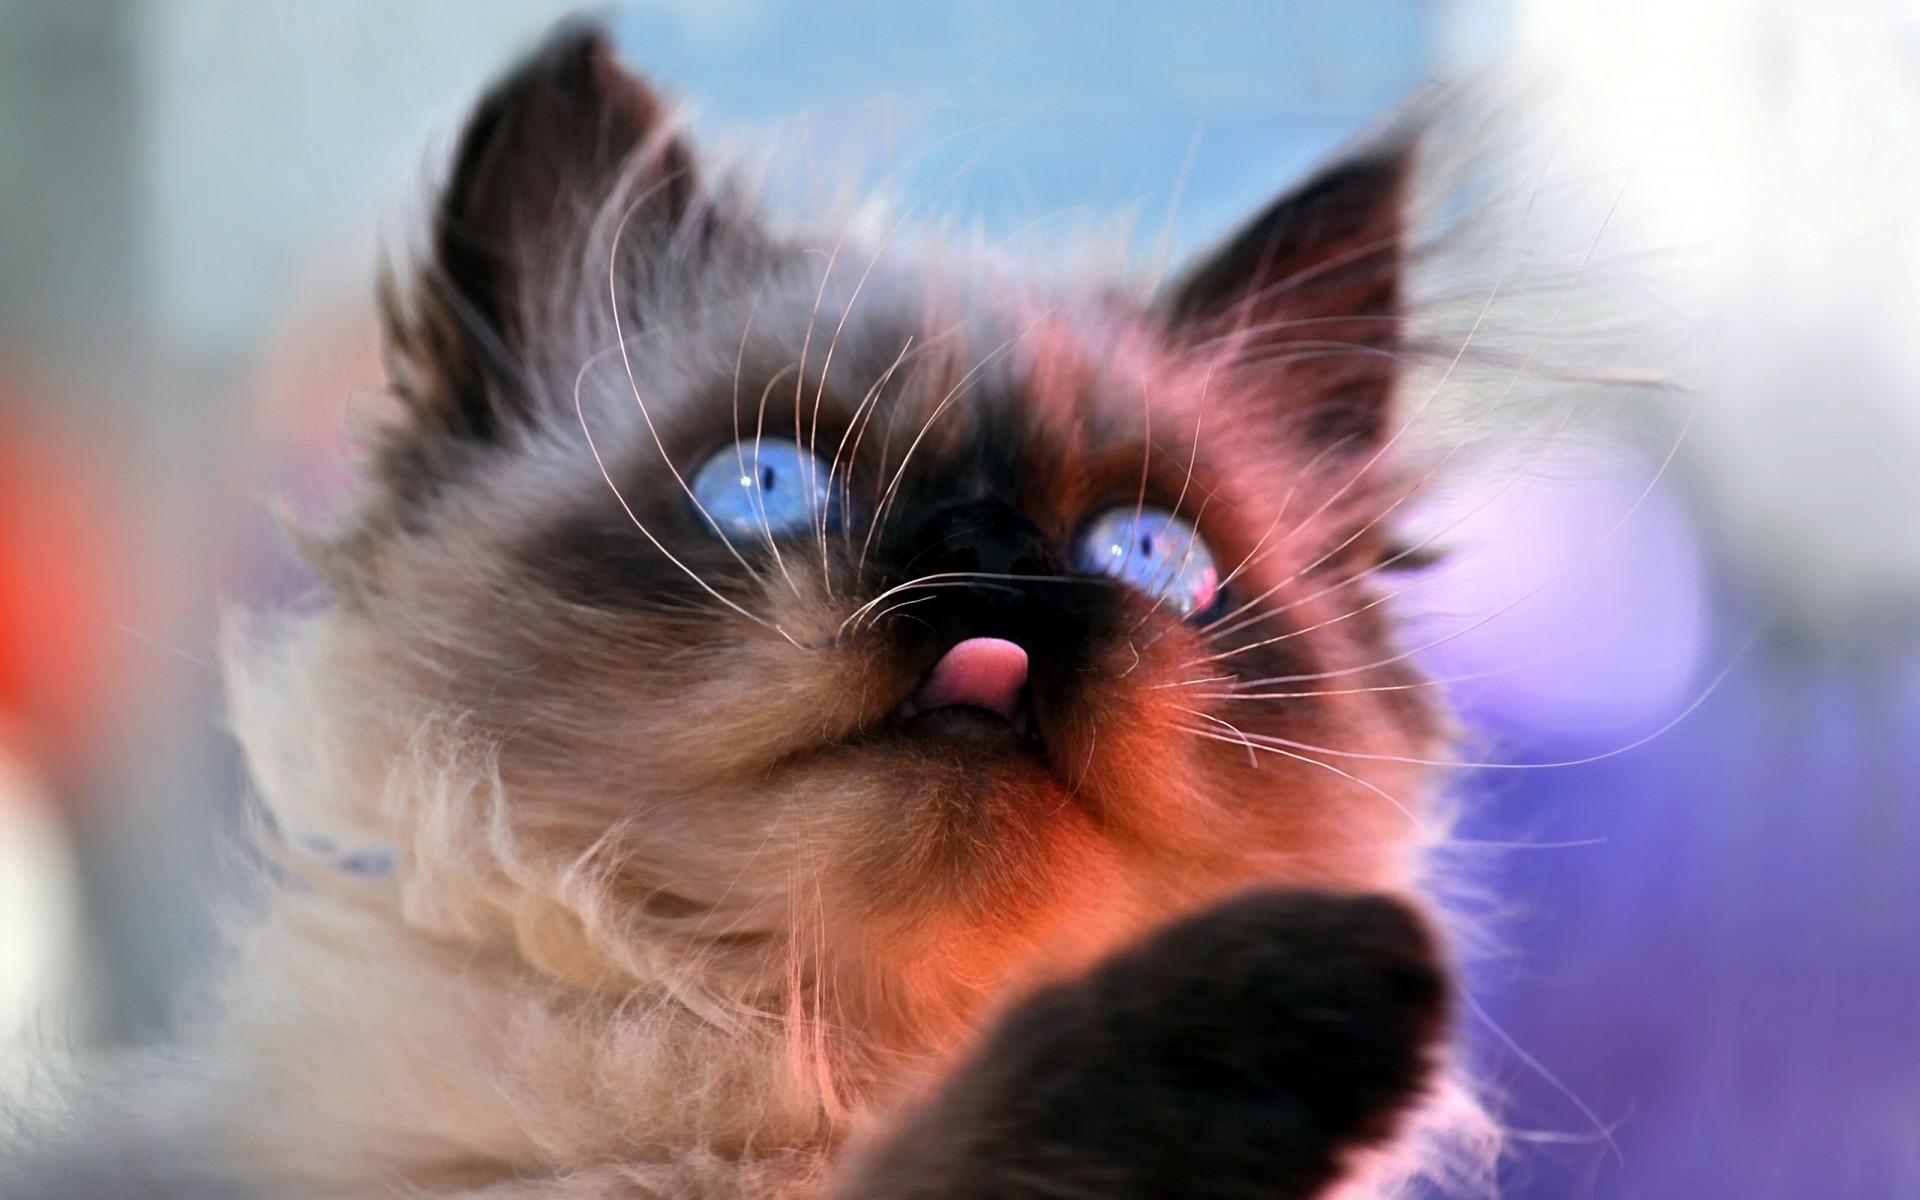 kittens, Cats, Felines, Babies, Face, Eyes, Humor, Cute, Funny, Whiskers Wallpaper